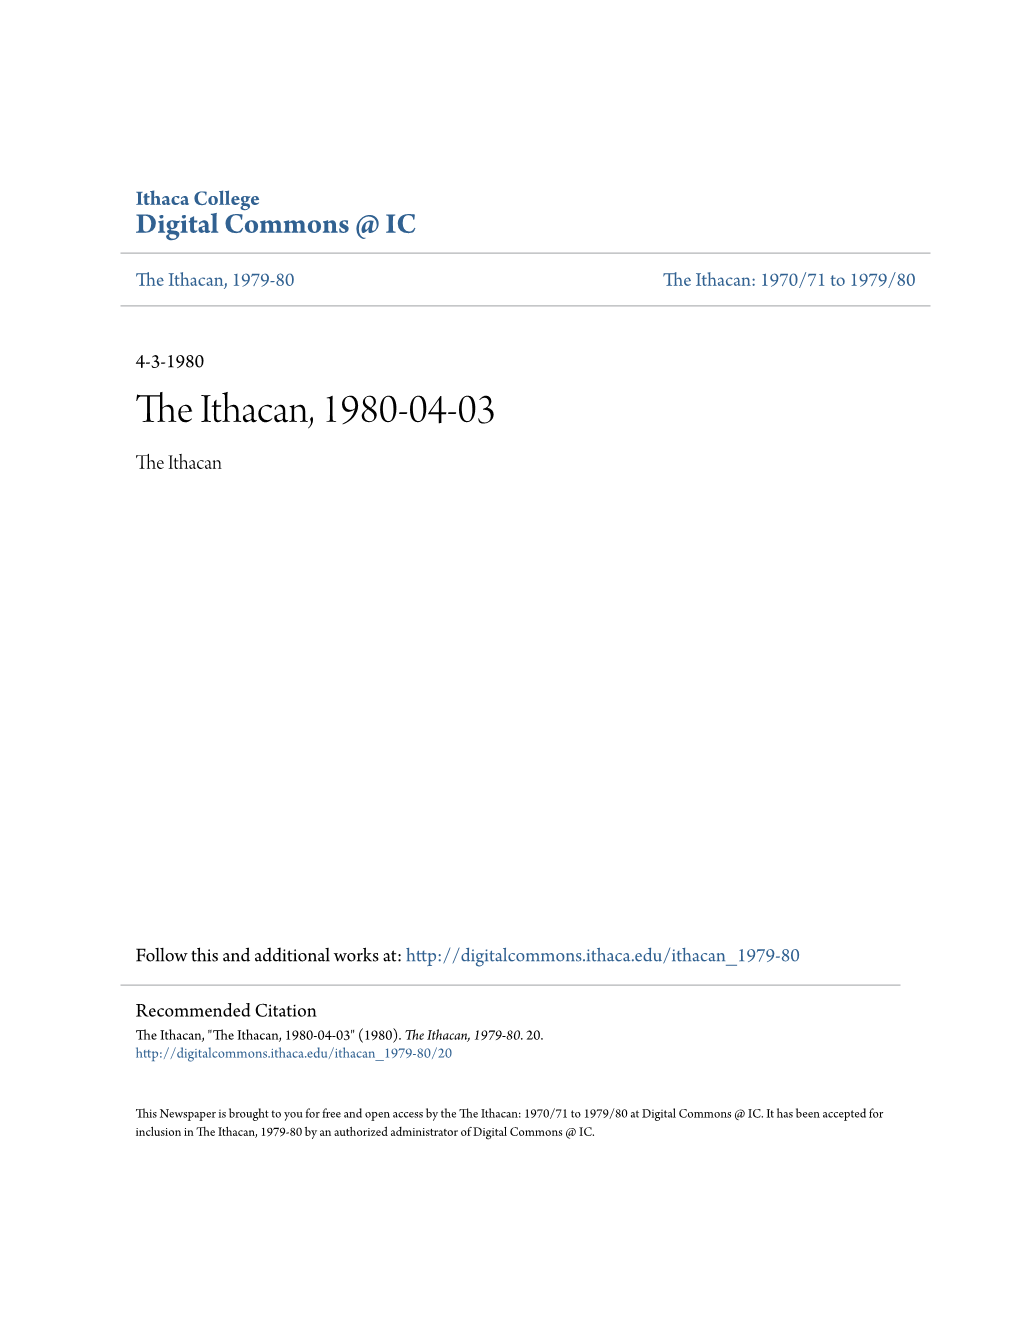 The Ithacan, 1980-04-03